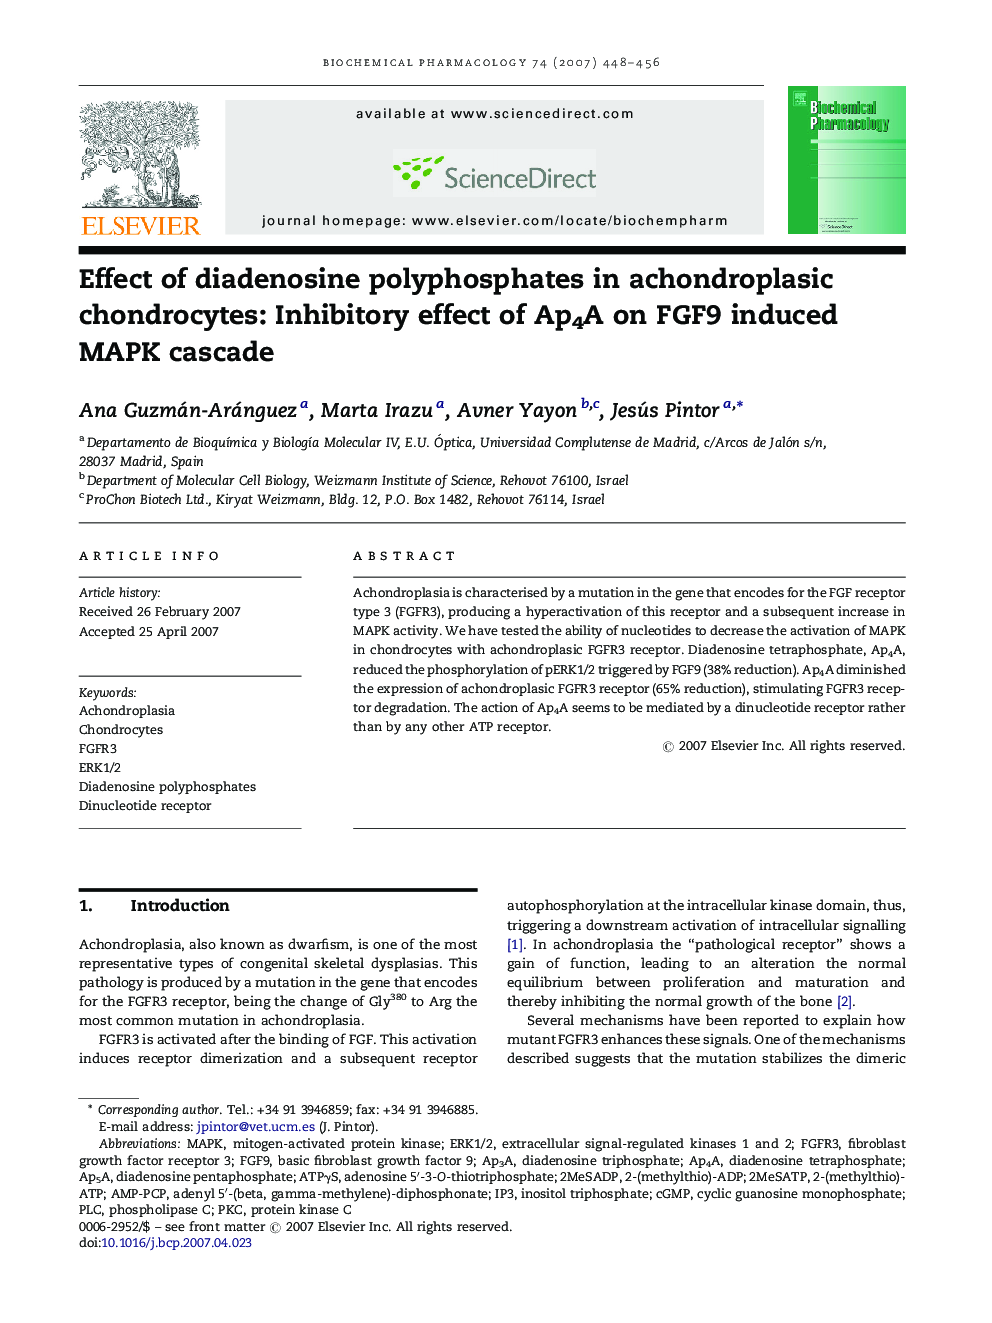 Effect of diadenosine polyphosphates in achondroplasic chondrocytes: Inhibitory effect of Ap4A on FGF9 induced MAPK cascade